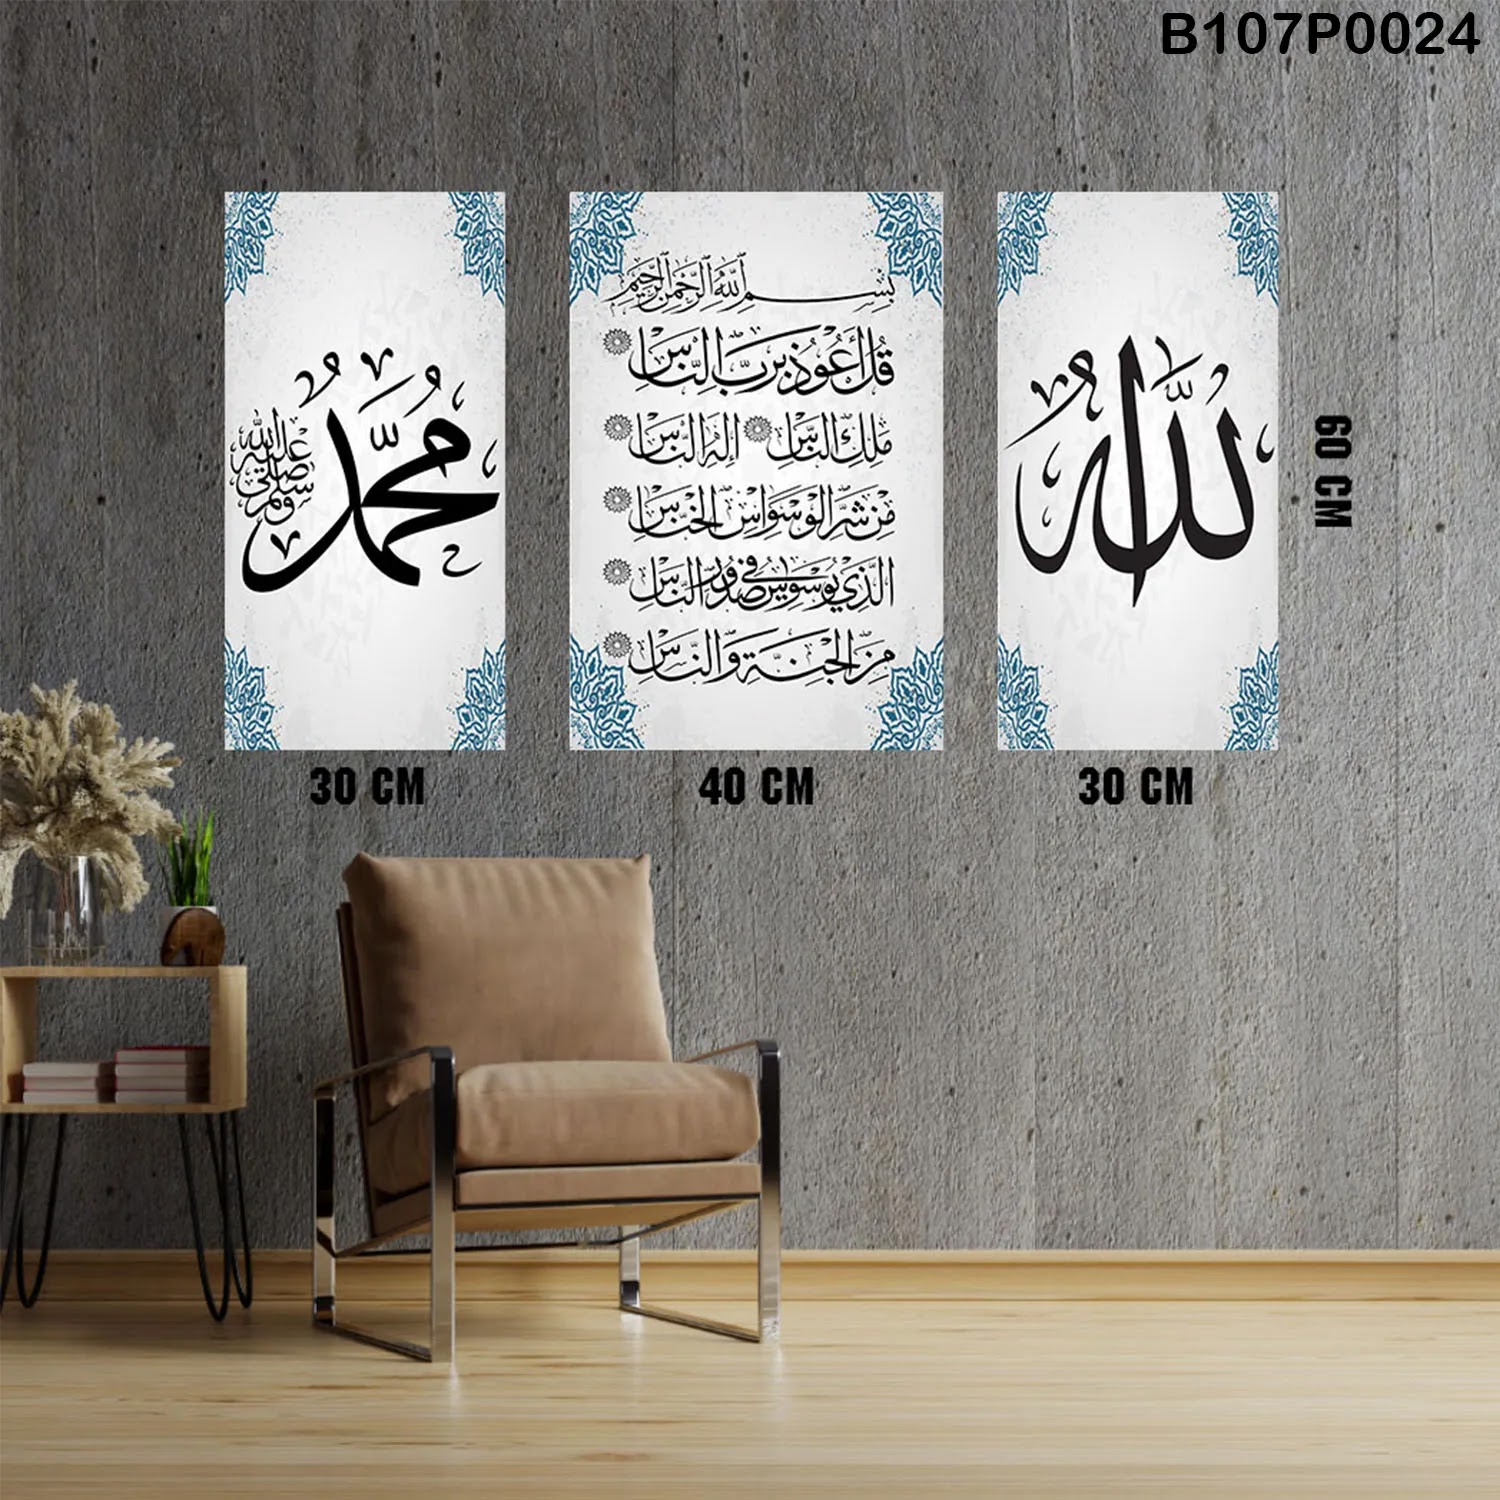 White Triptych panel with Arabic calligraphy (Allah - Al-Nas - Mohammad)